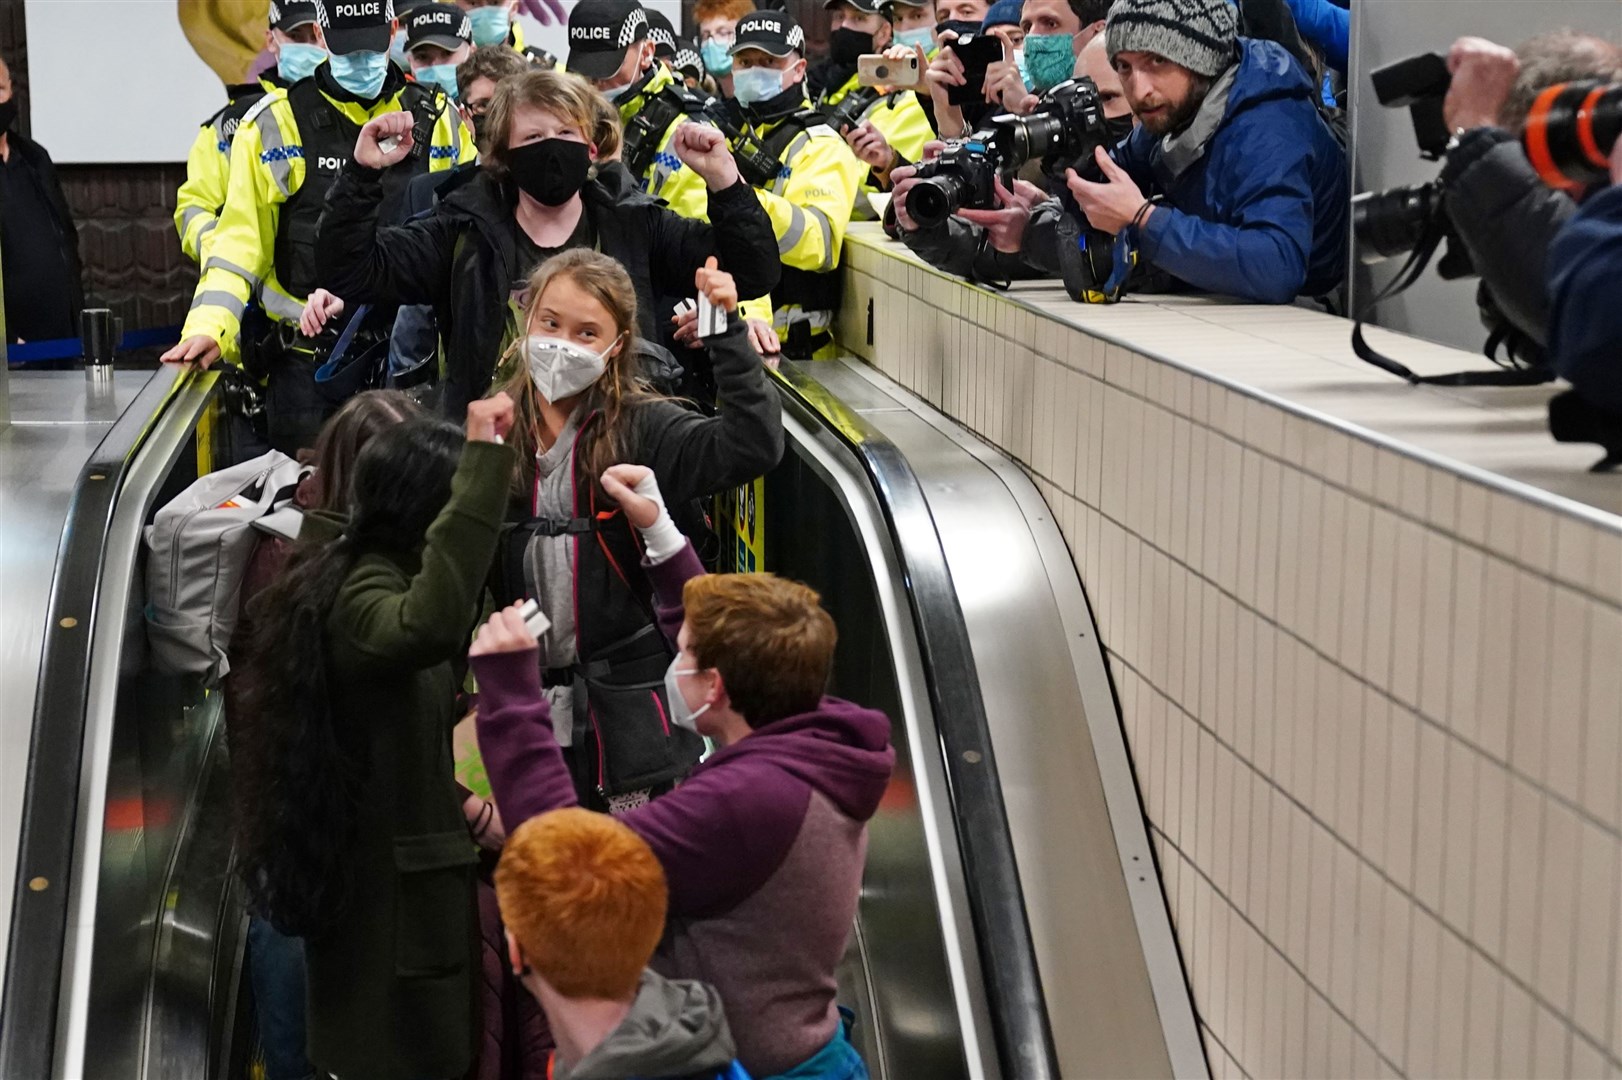 Greta Thunberg was mobbed by supporters when she arrived in Glasgow for Cop26 in 2021 (Jane Barlow/PA)